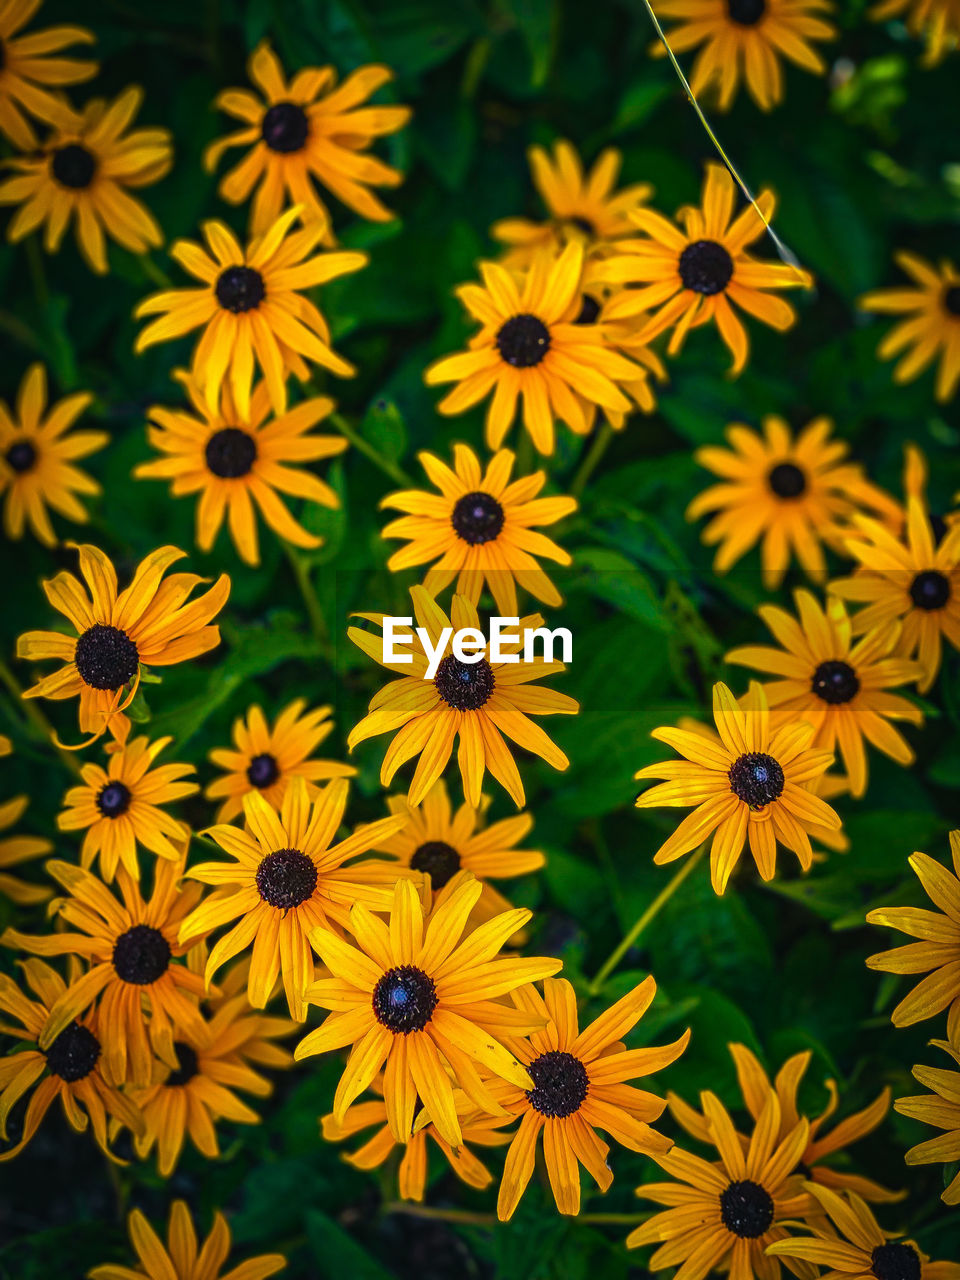 flower, flowering plant, plant, freshness, beauty in nature, yellow, flower head, growth, fragility, petal, nature, close-up, no people, inflorescence, herb, full frame, backgrounds, day, outdoors, high angle view, botany, pollen, black-eyed susan, pattern